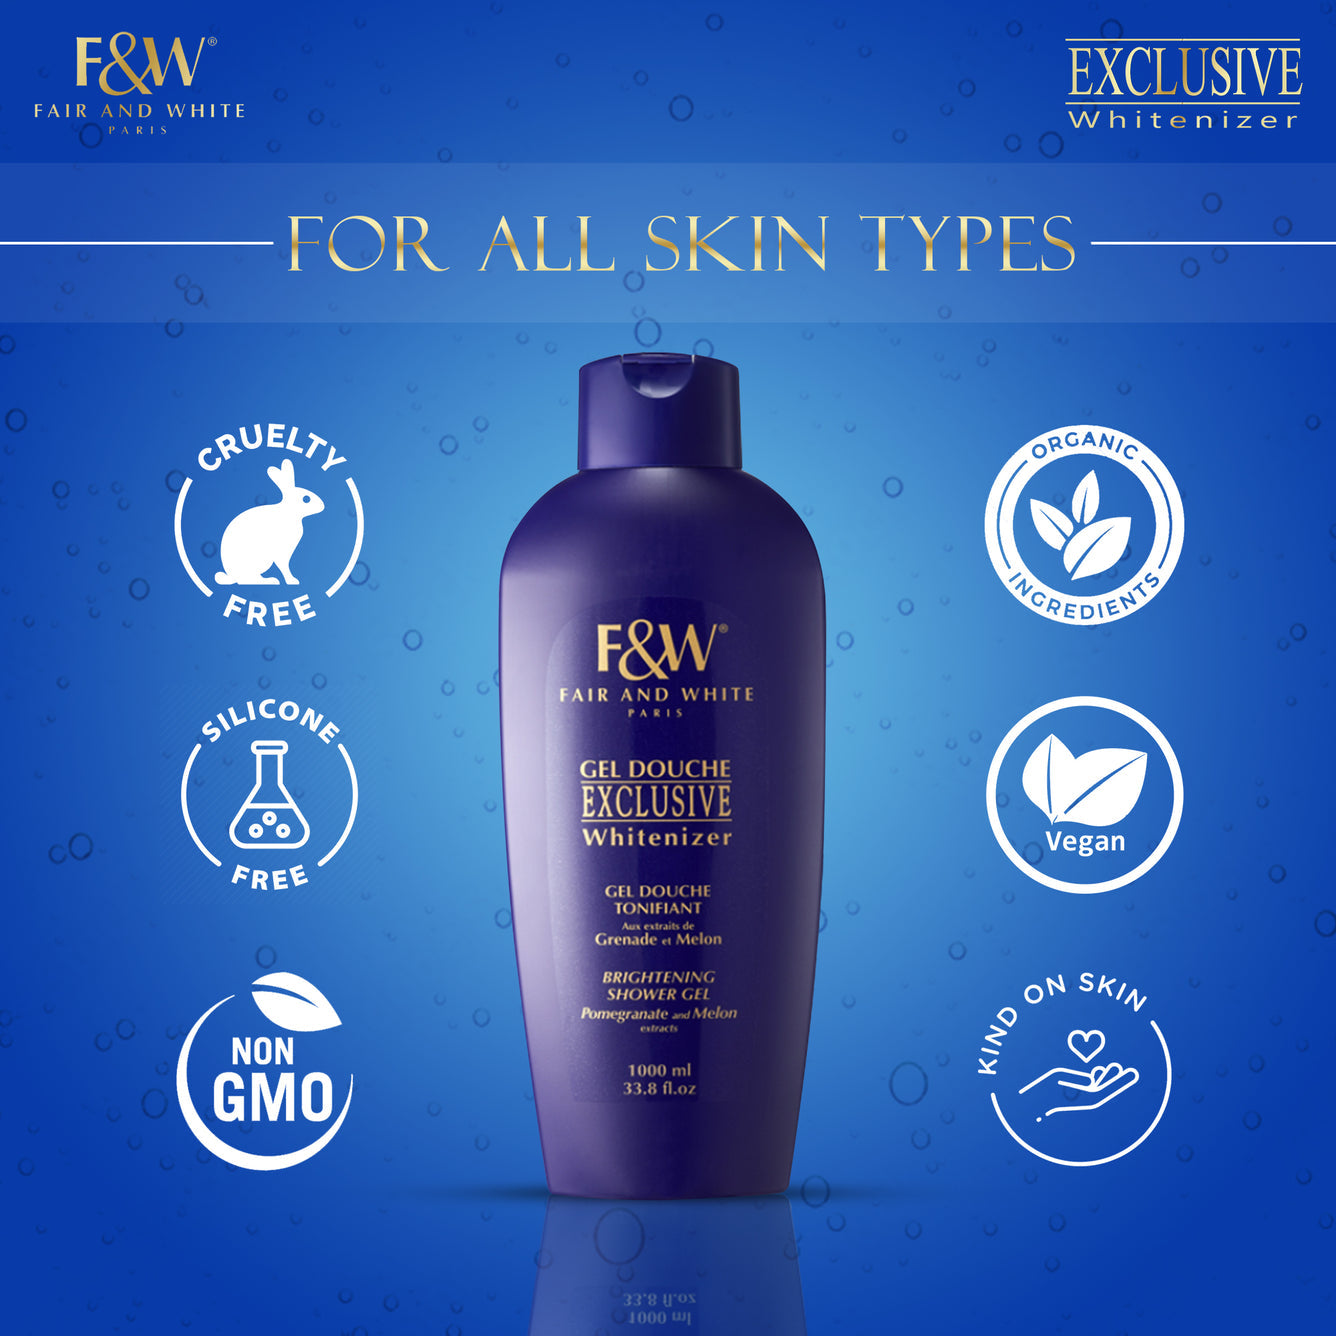 F&W Exclusive Shower Gel  Pomegranate and Melon extracts 1000 ml